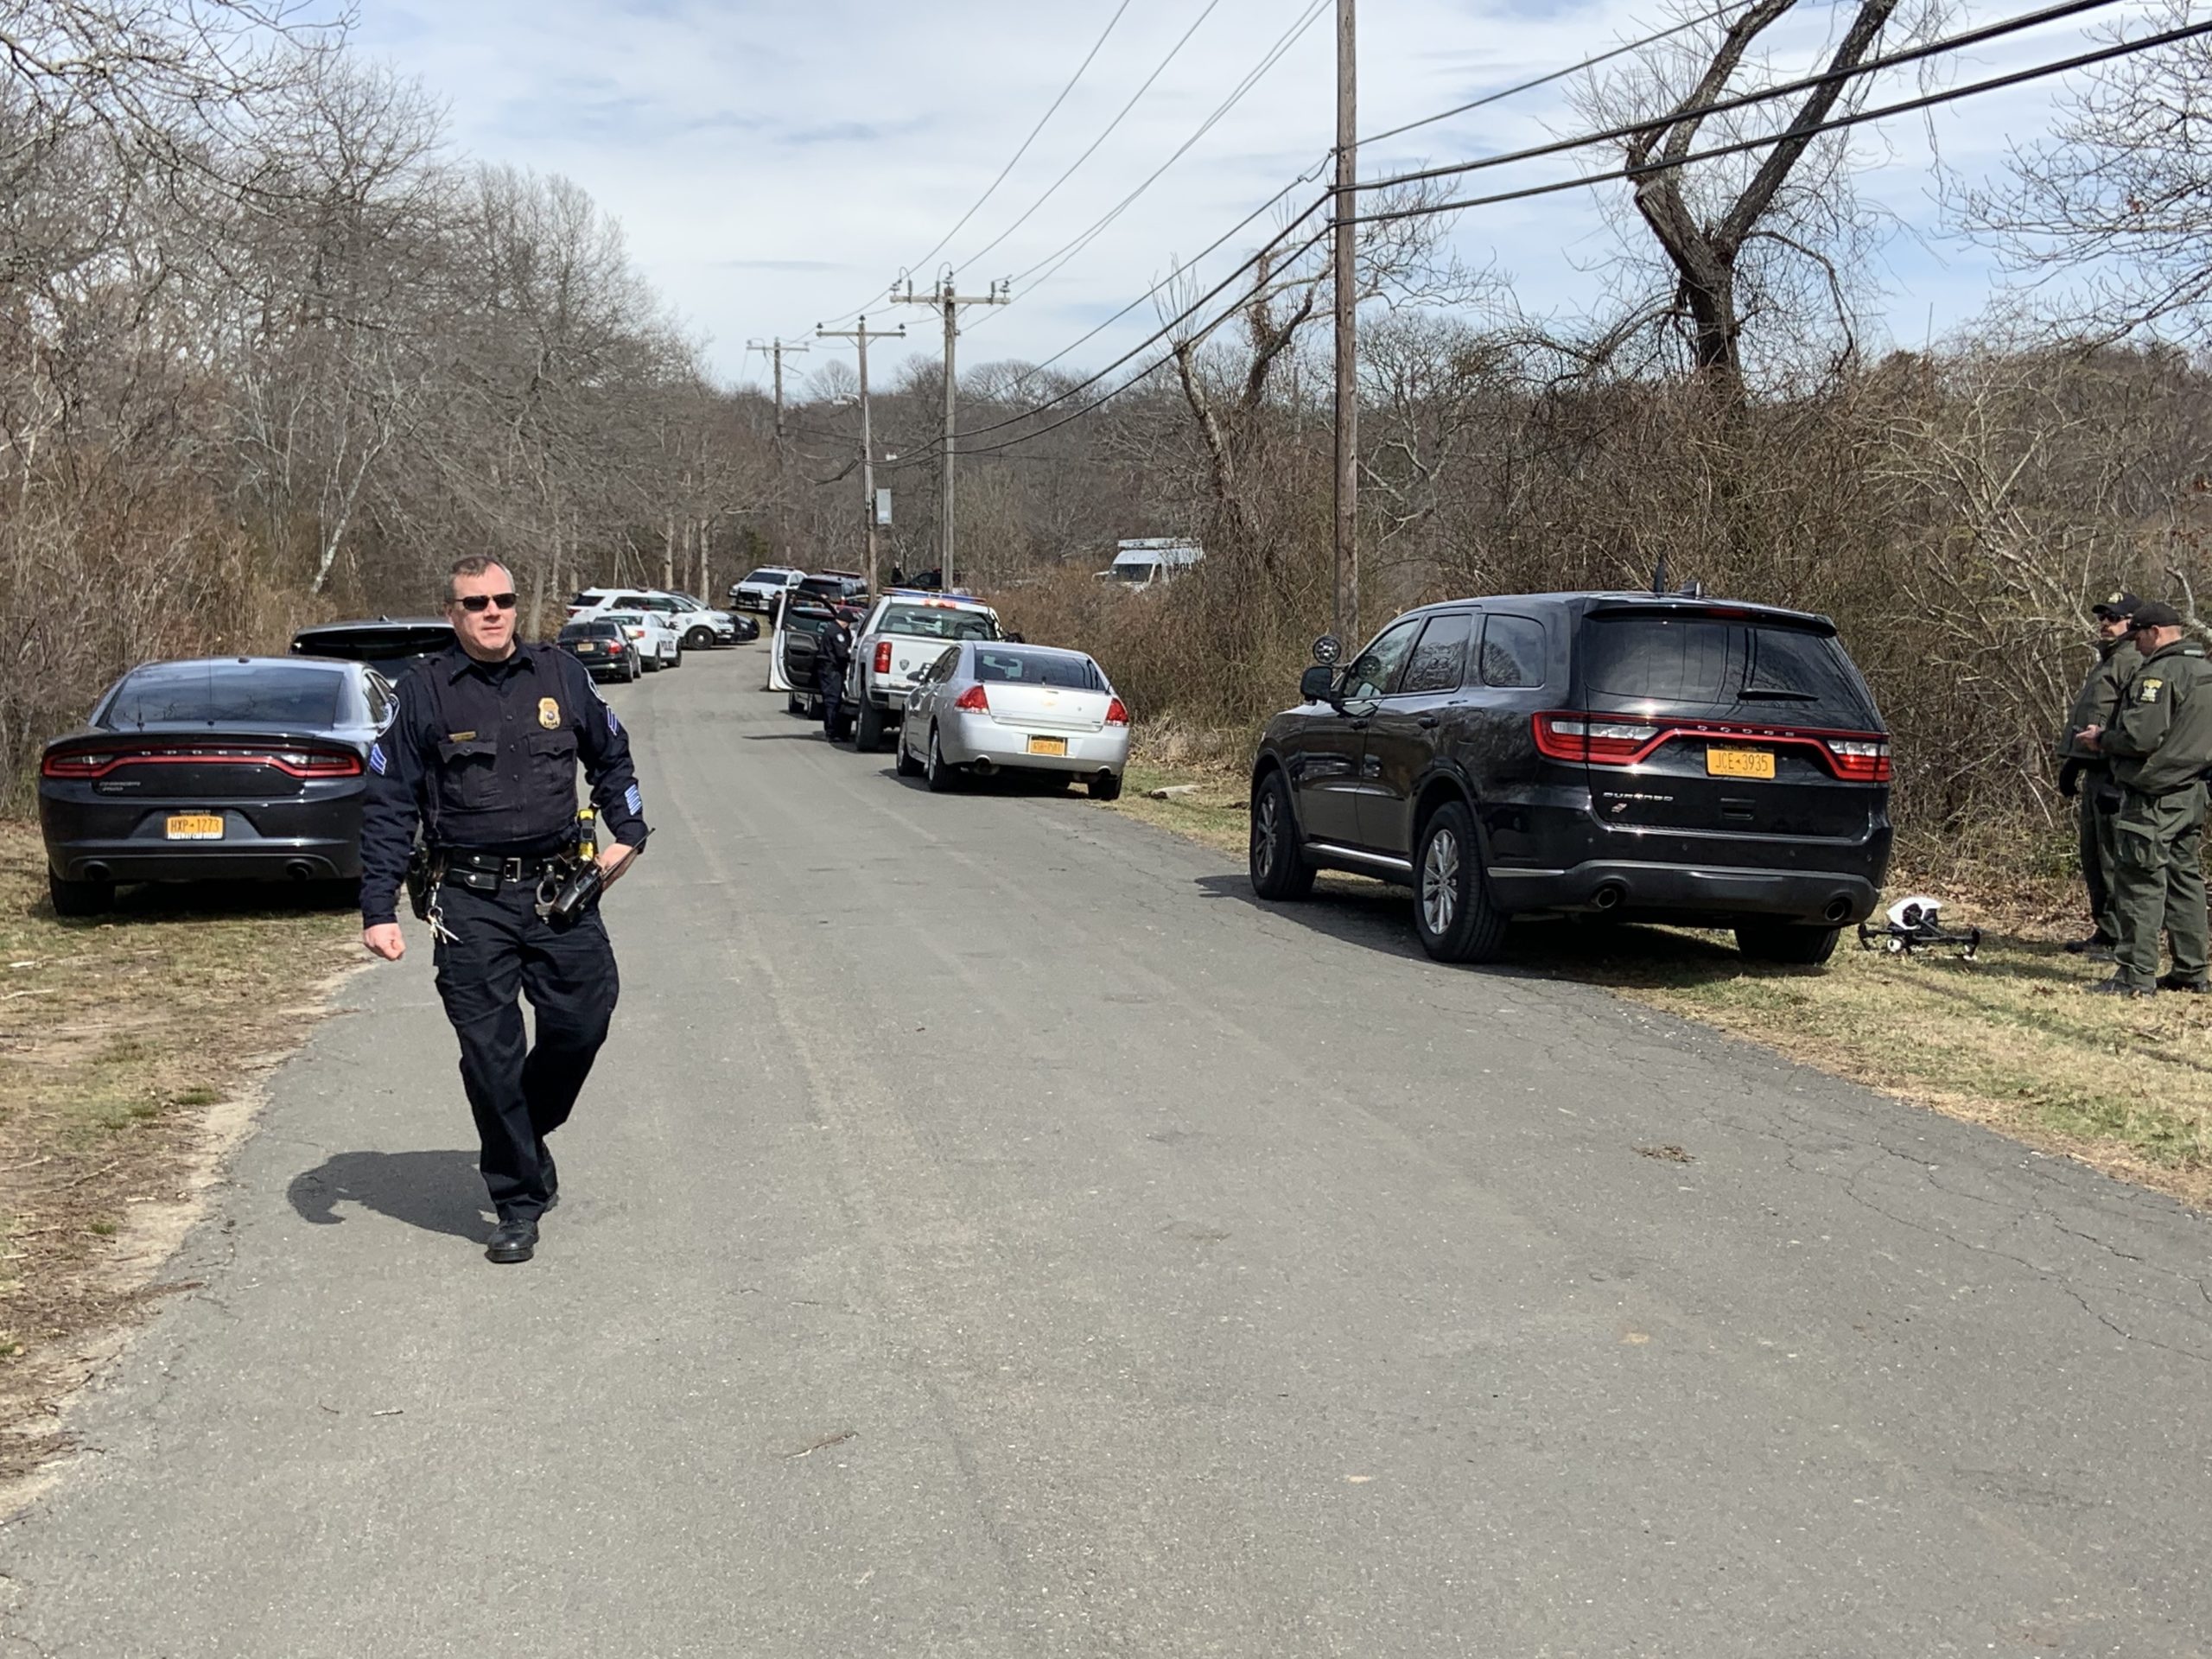 Police search for Peter Beard on Old Montauk Highway.